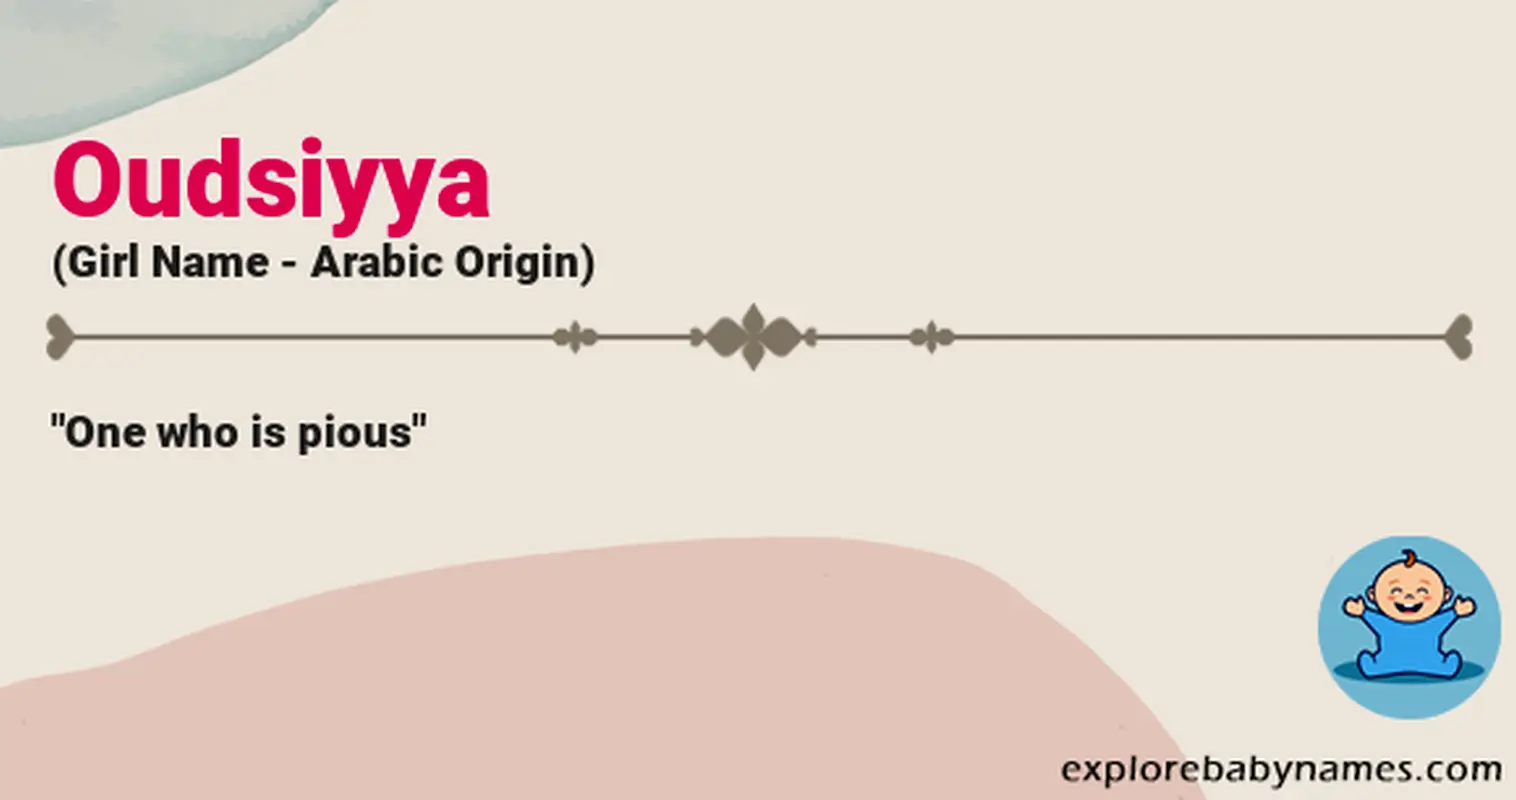 Meaning of Oudsiyya